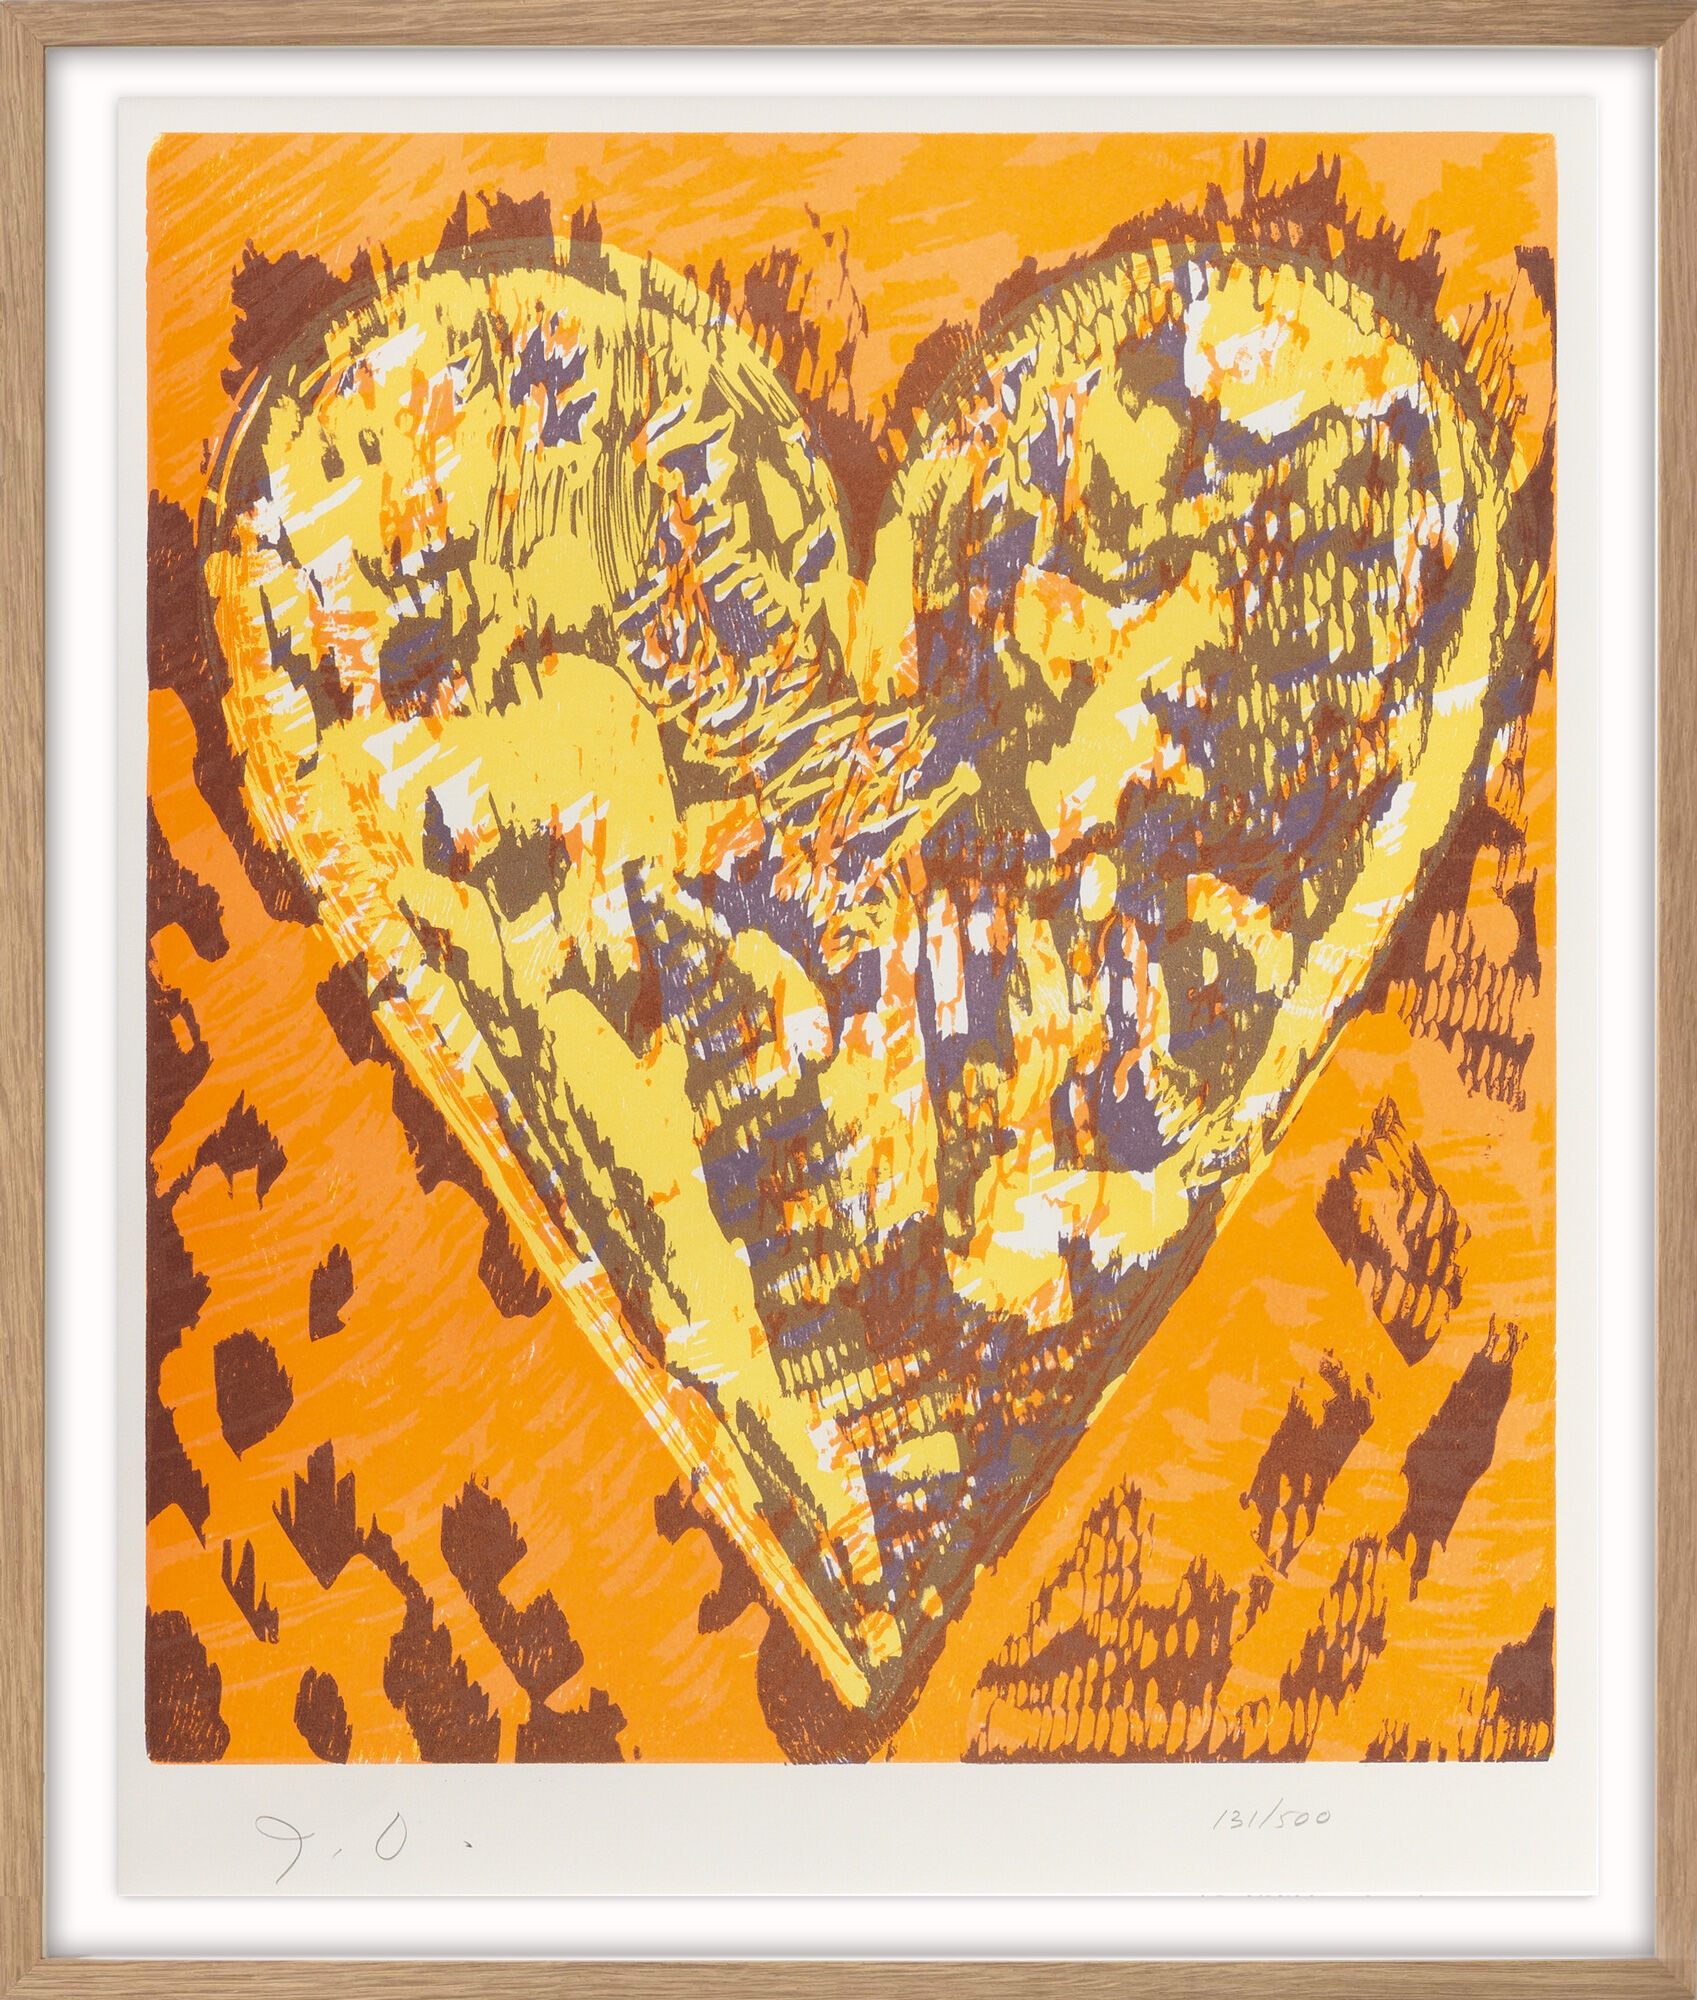 Picture "Heart" (1993) by Jim Dine